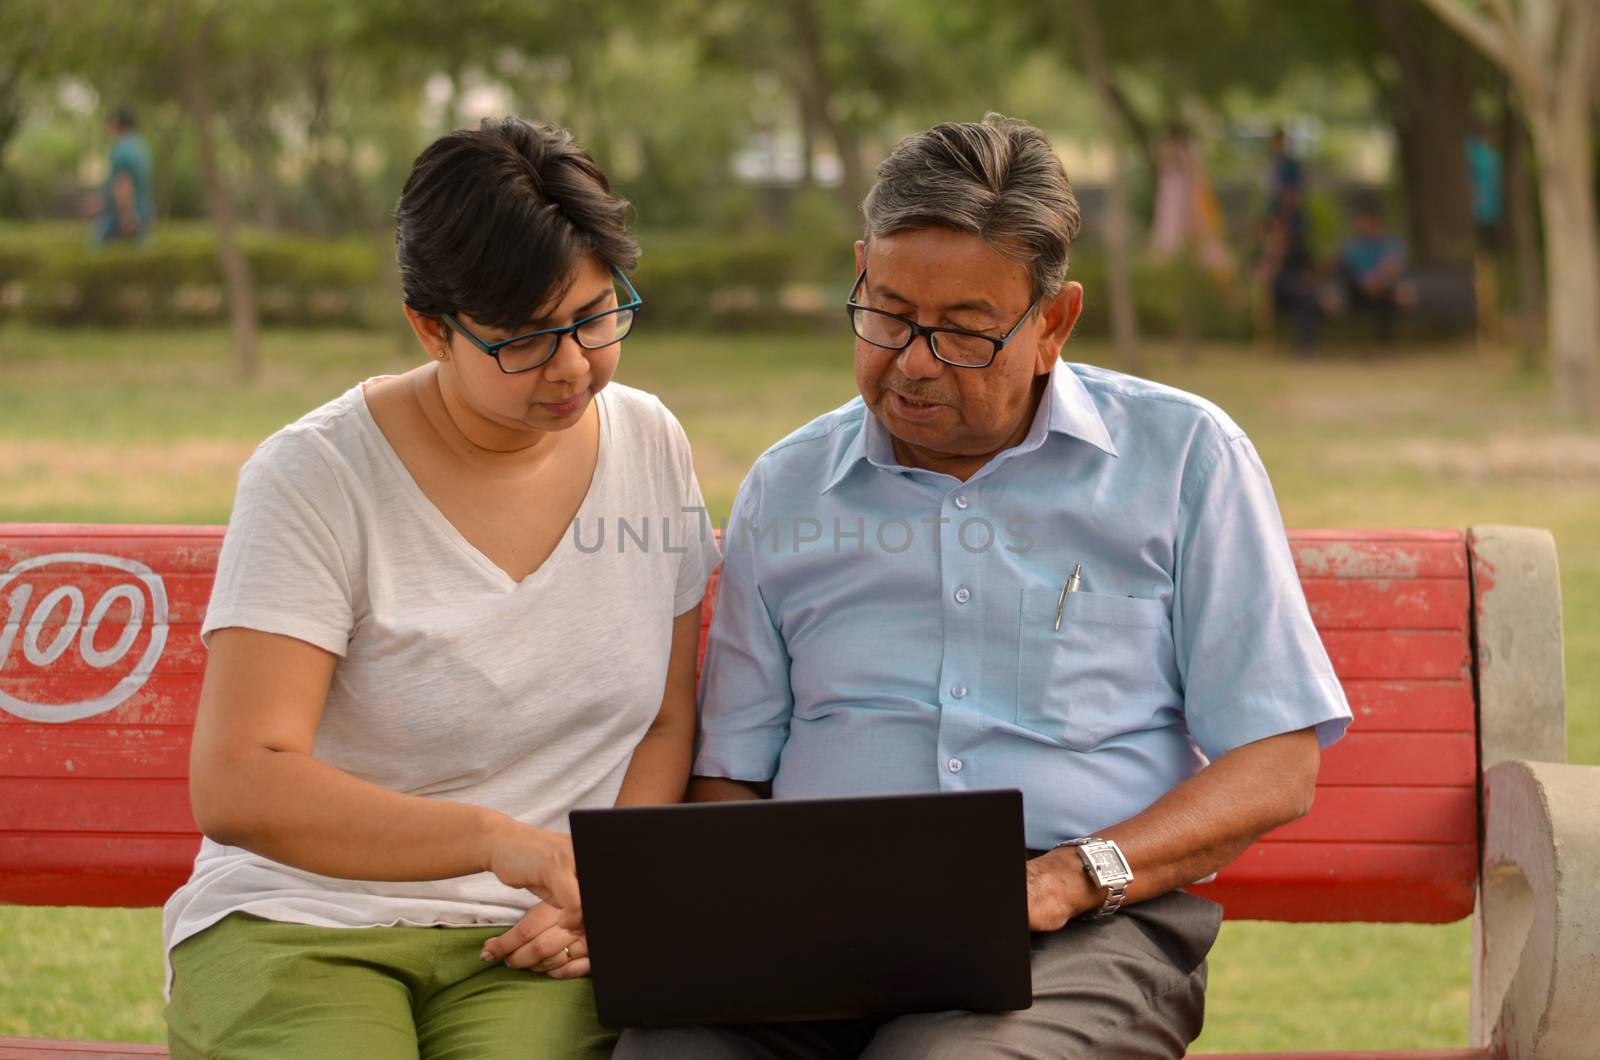 Young Indian woman manager in western formals / shirt helping old Indian man on a laptop promoting digital literacy for elderly in a park in New Delhi, India.Concept: father daughter/ Digital literacy by jayantbahel